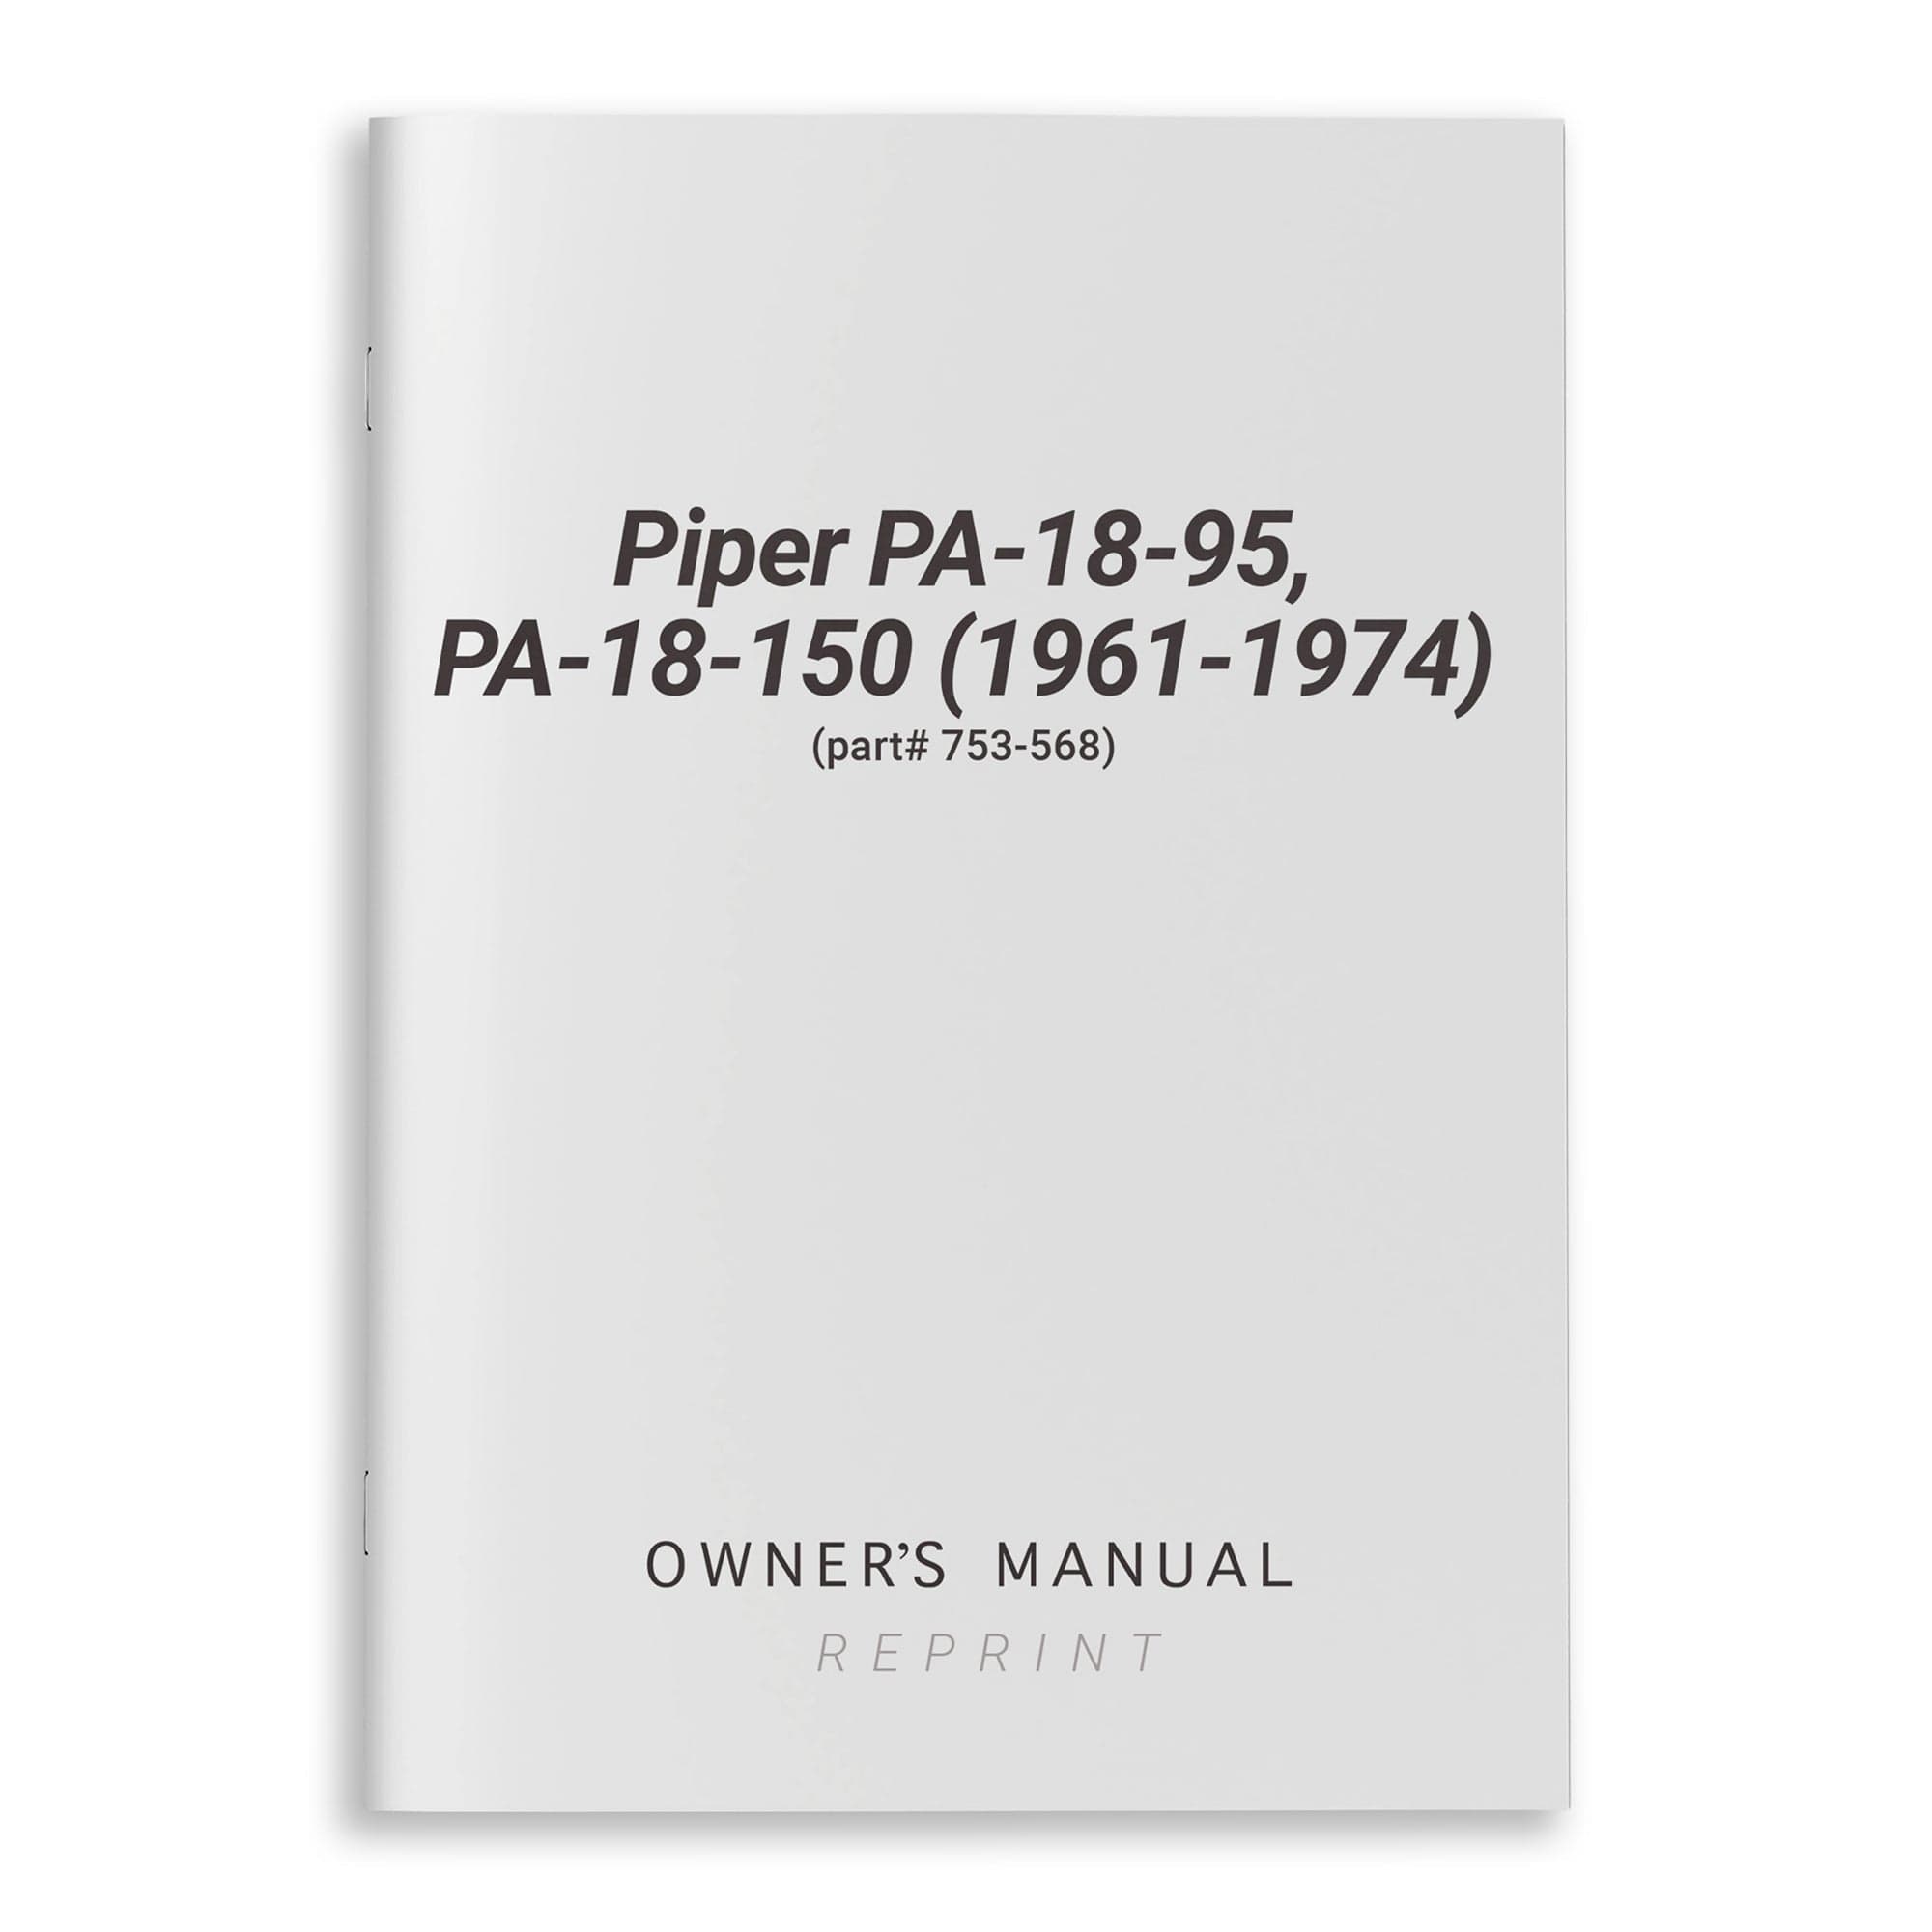 Piper PA-18-95, PA-18-150 (1961-1974) Owner's Manual (part# 753-568) - PilotMall.com